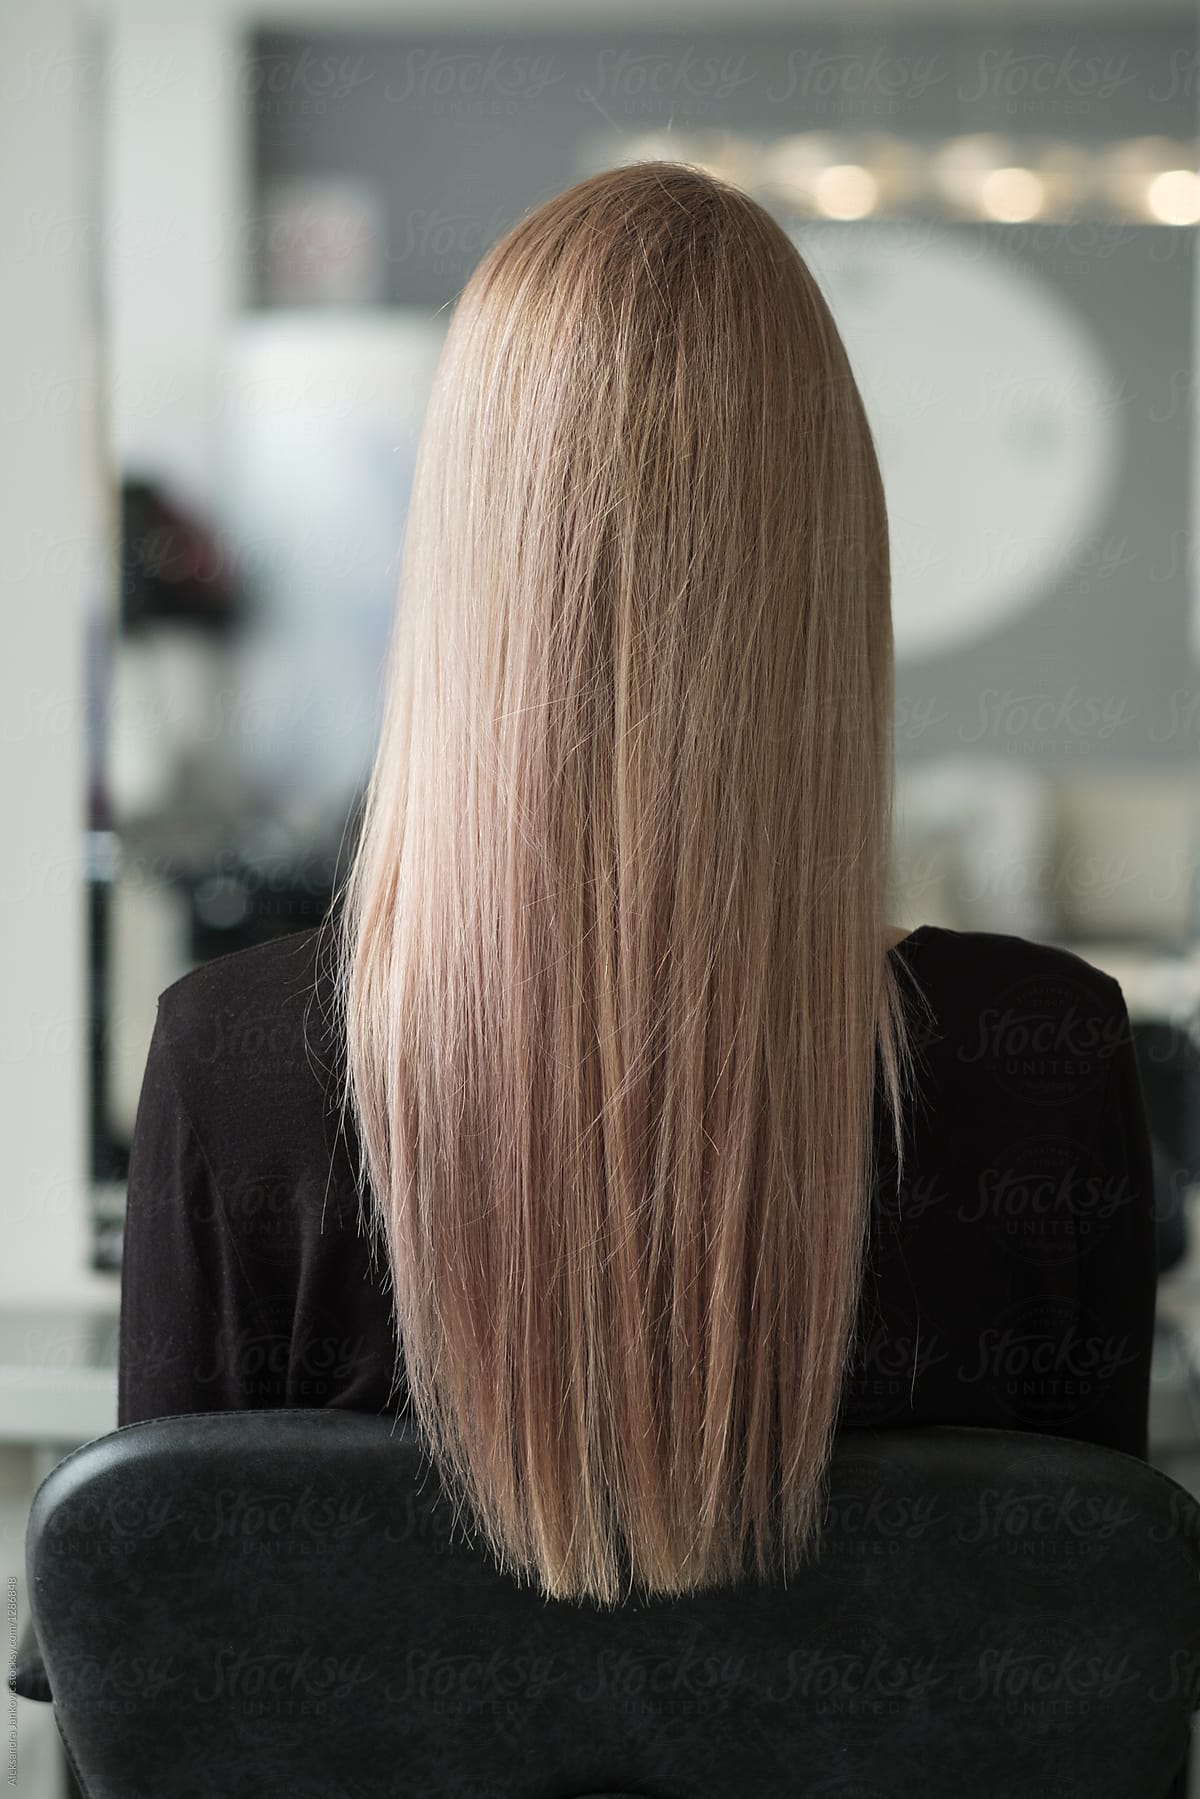 Back View Of Woman With Beautiful Long Hair At Hair Salon By